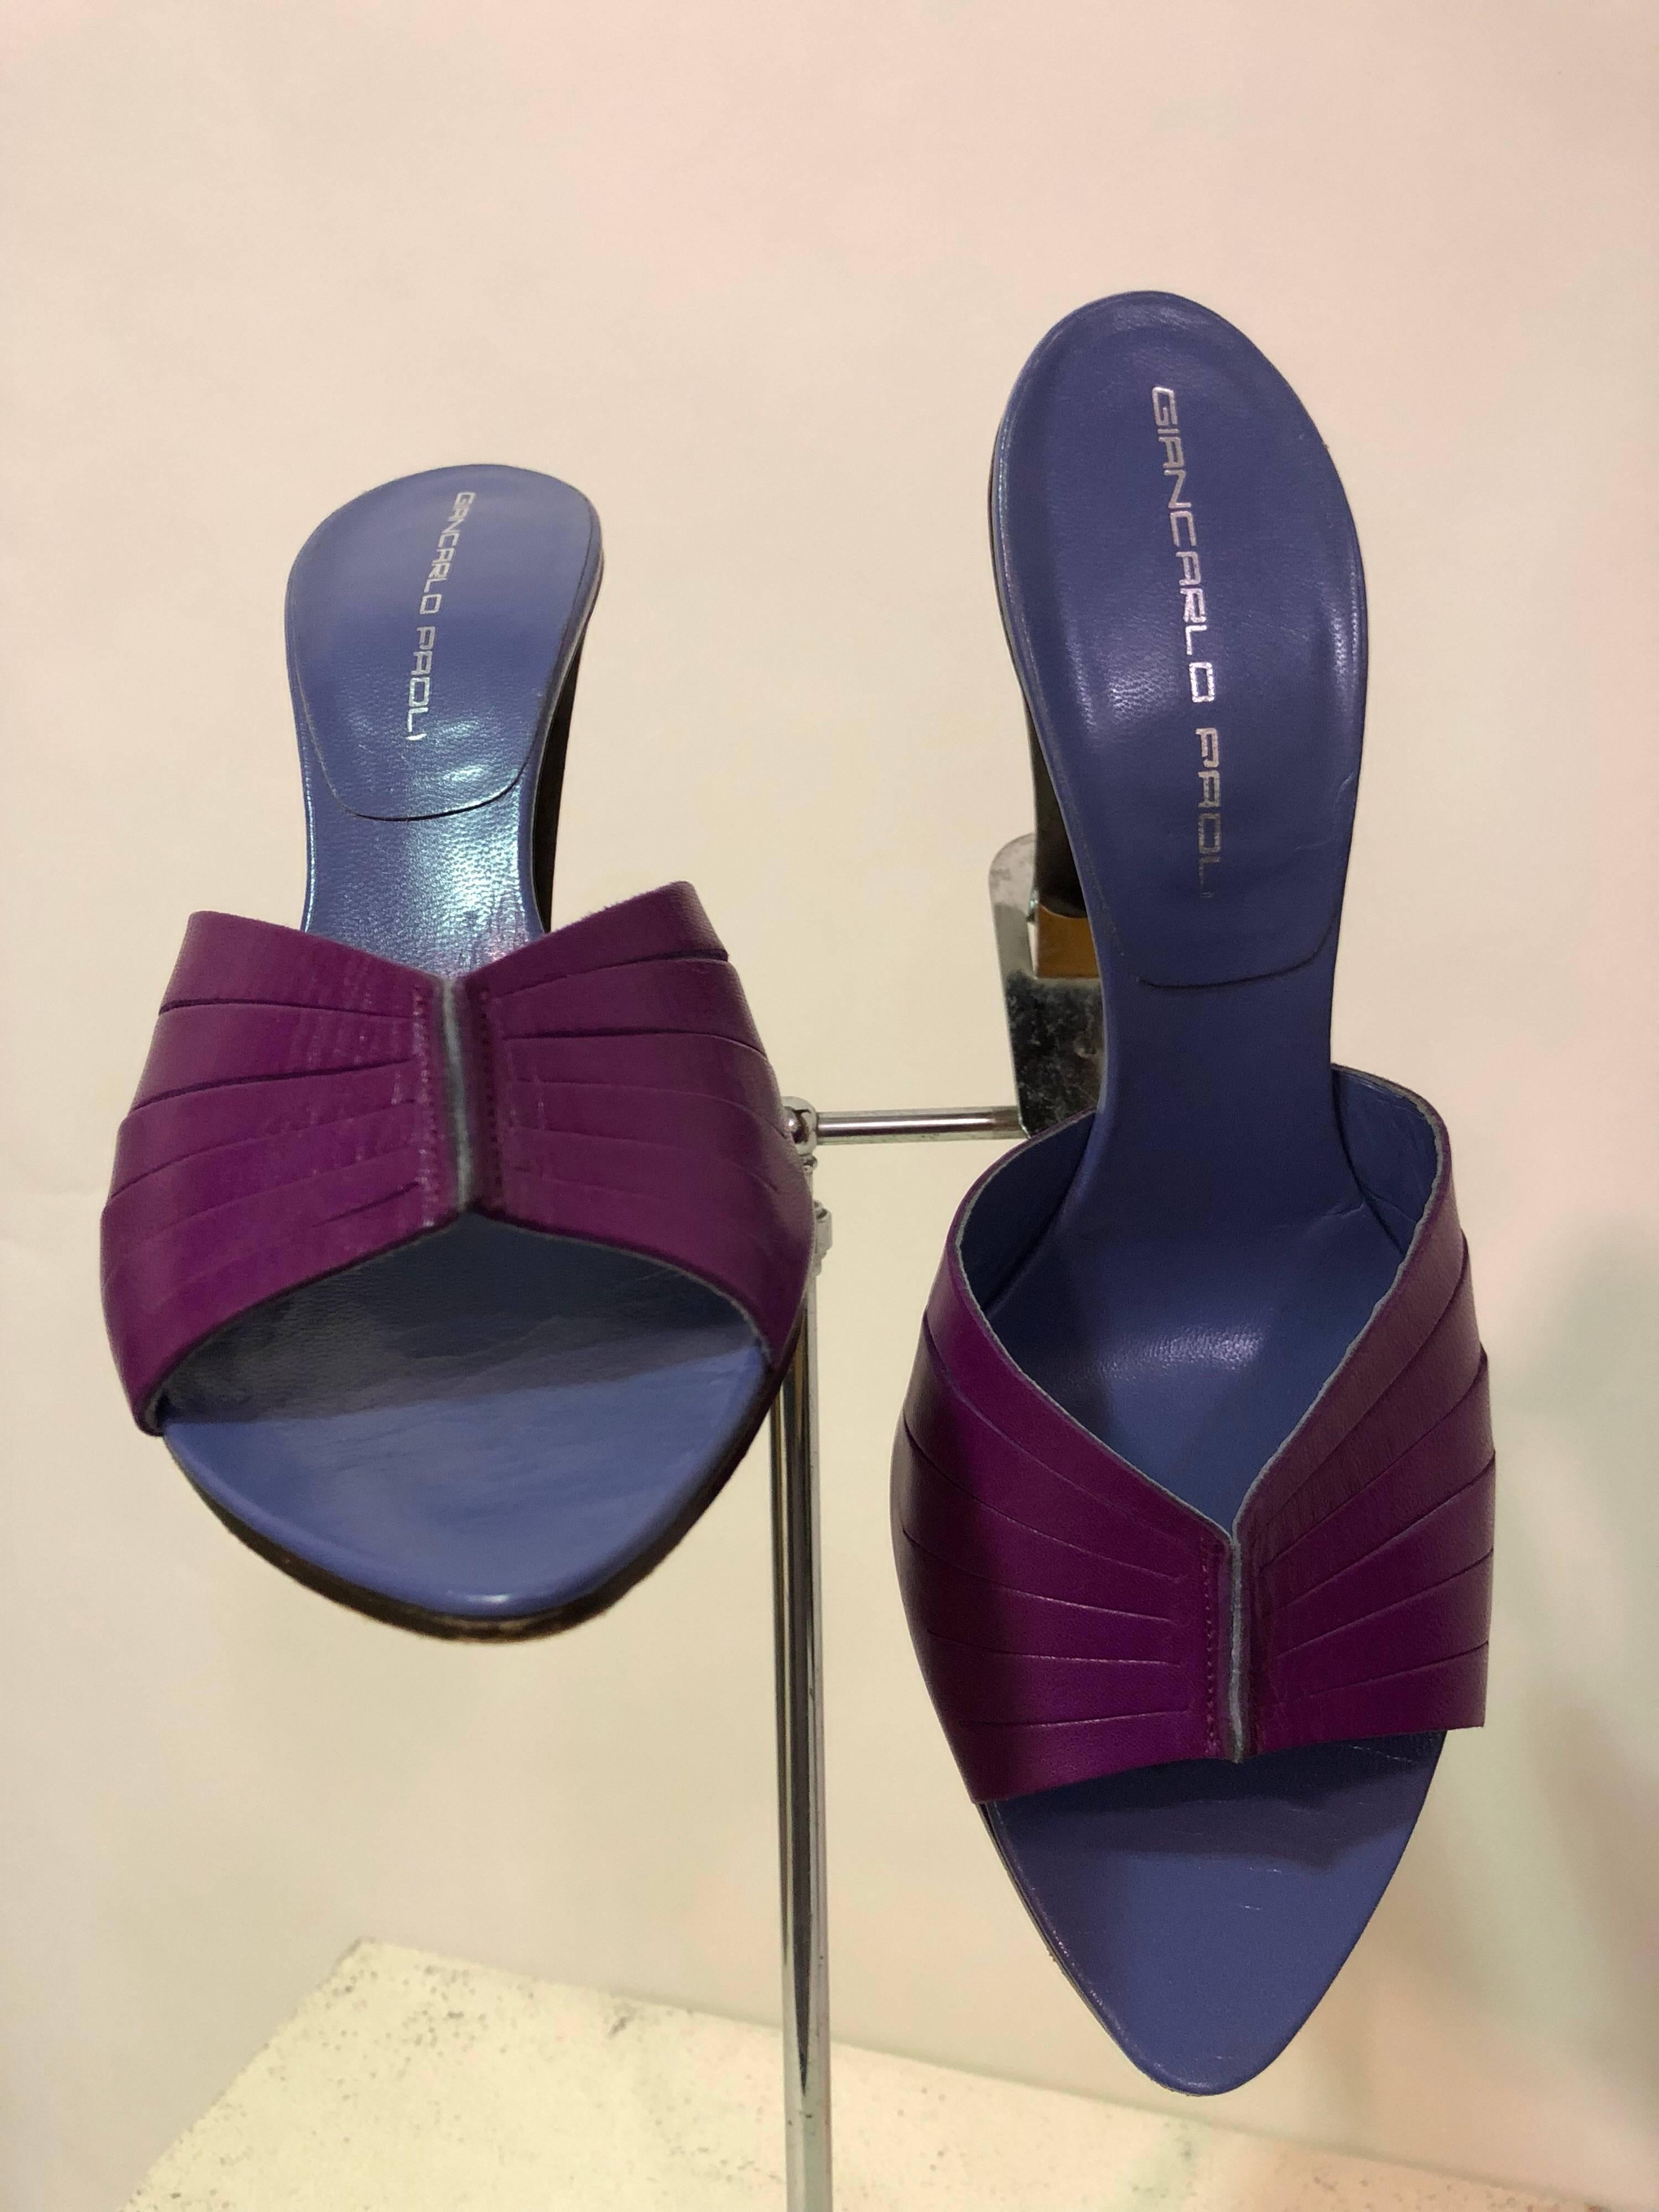 1990s Giancarlo Paoli magenta and periwinkle leather stiletto mules. Vamp is slit on sides and has decorative stitching at center.  Modern and retro at the same time!   Italian size 41.